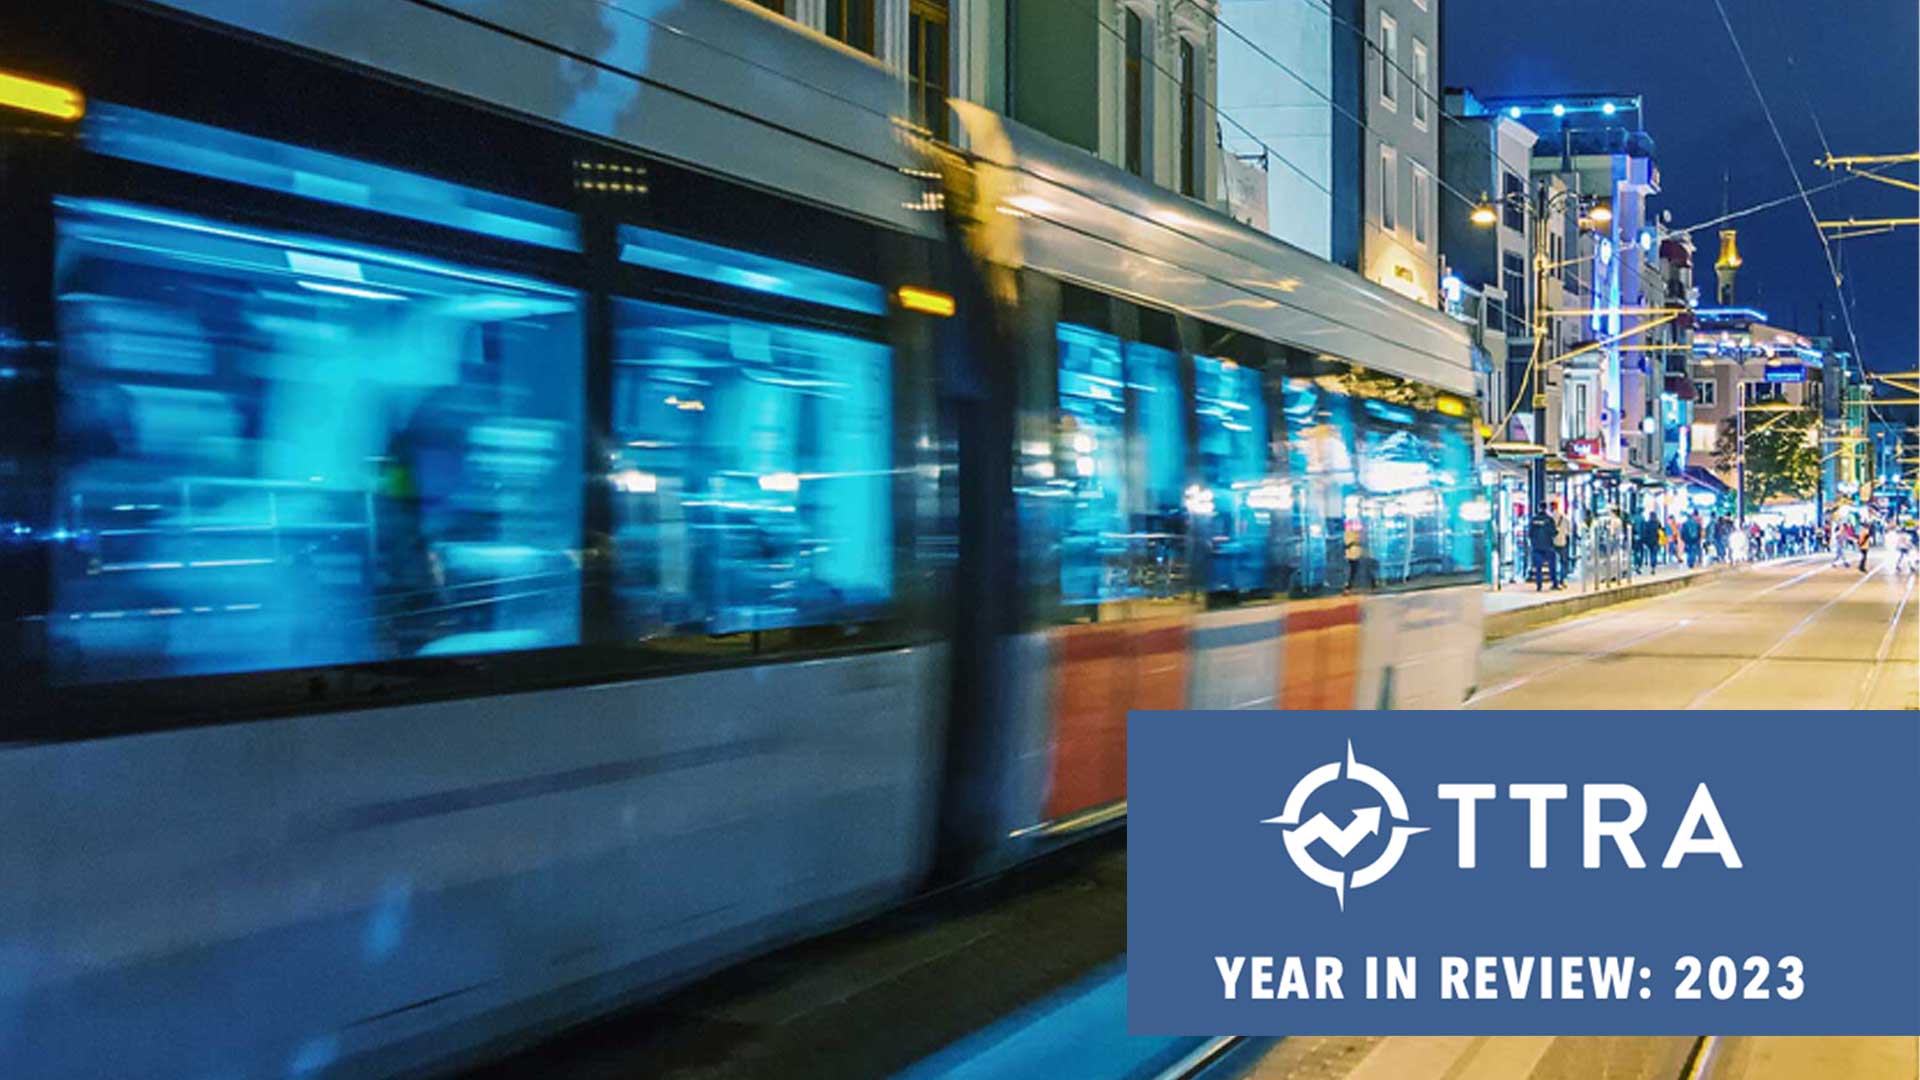 TTRA Year in review 2023